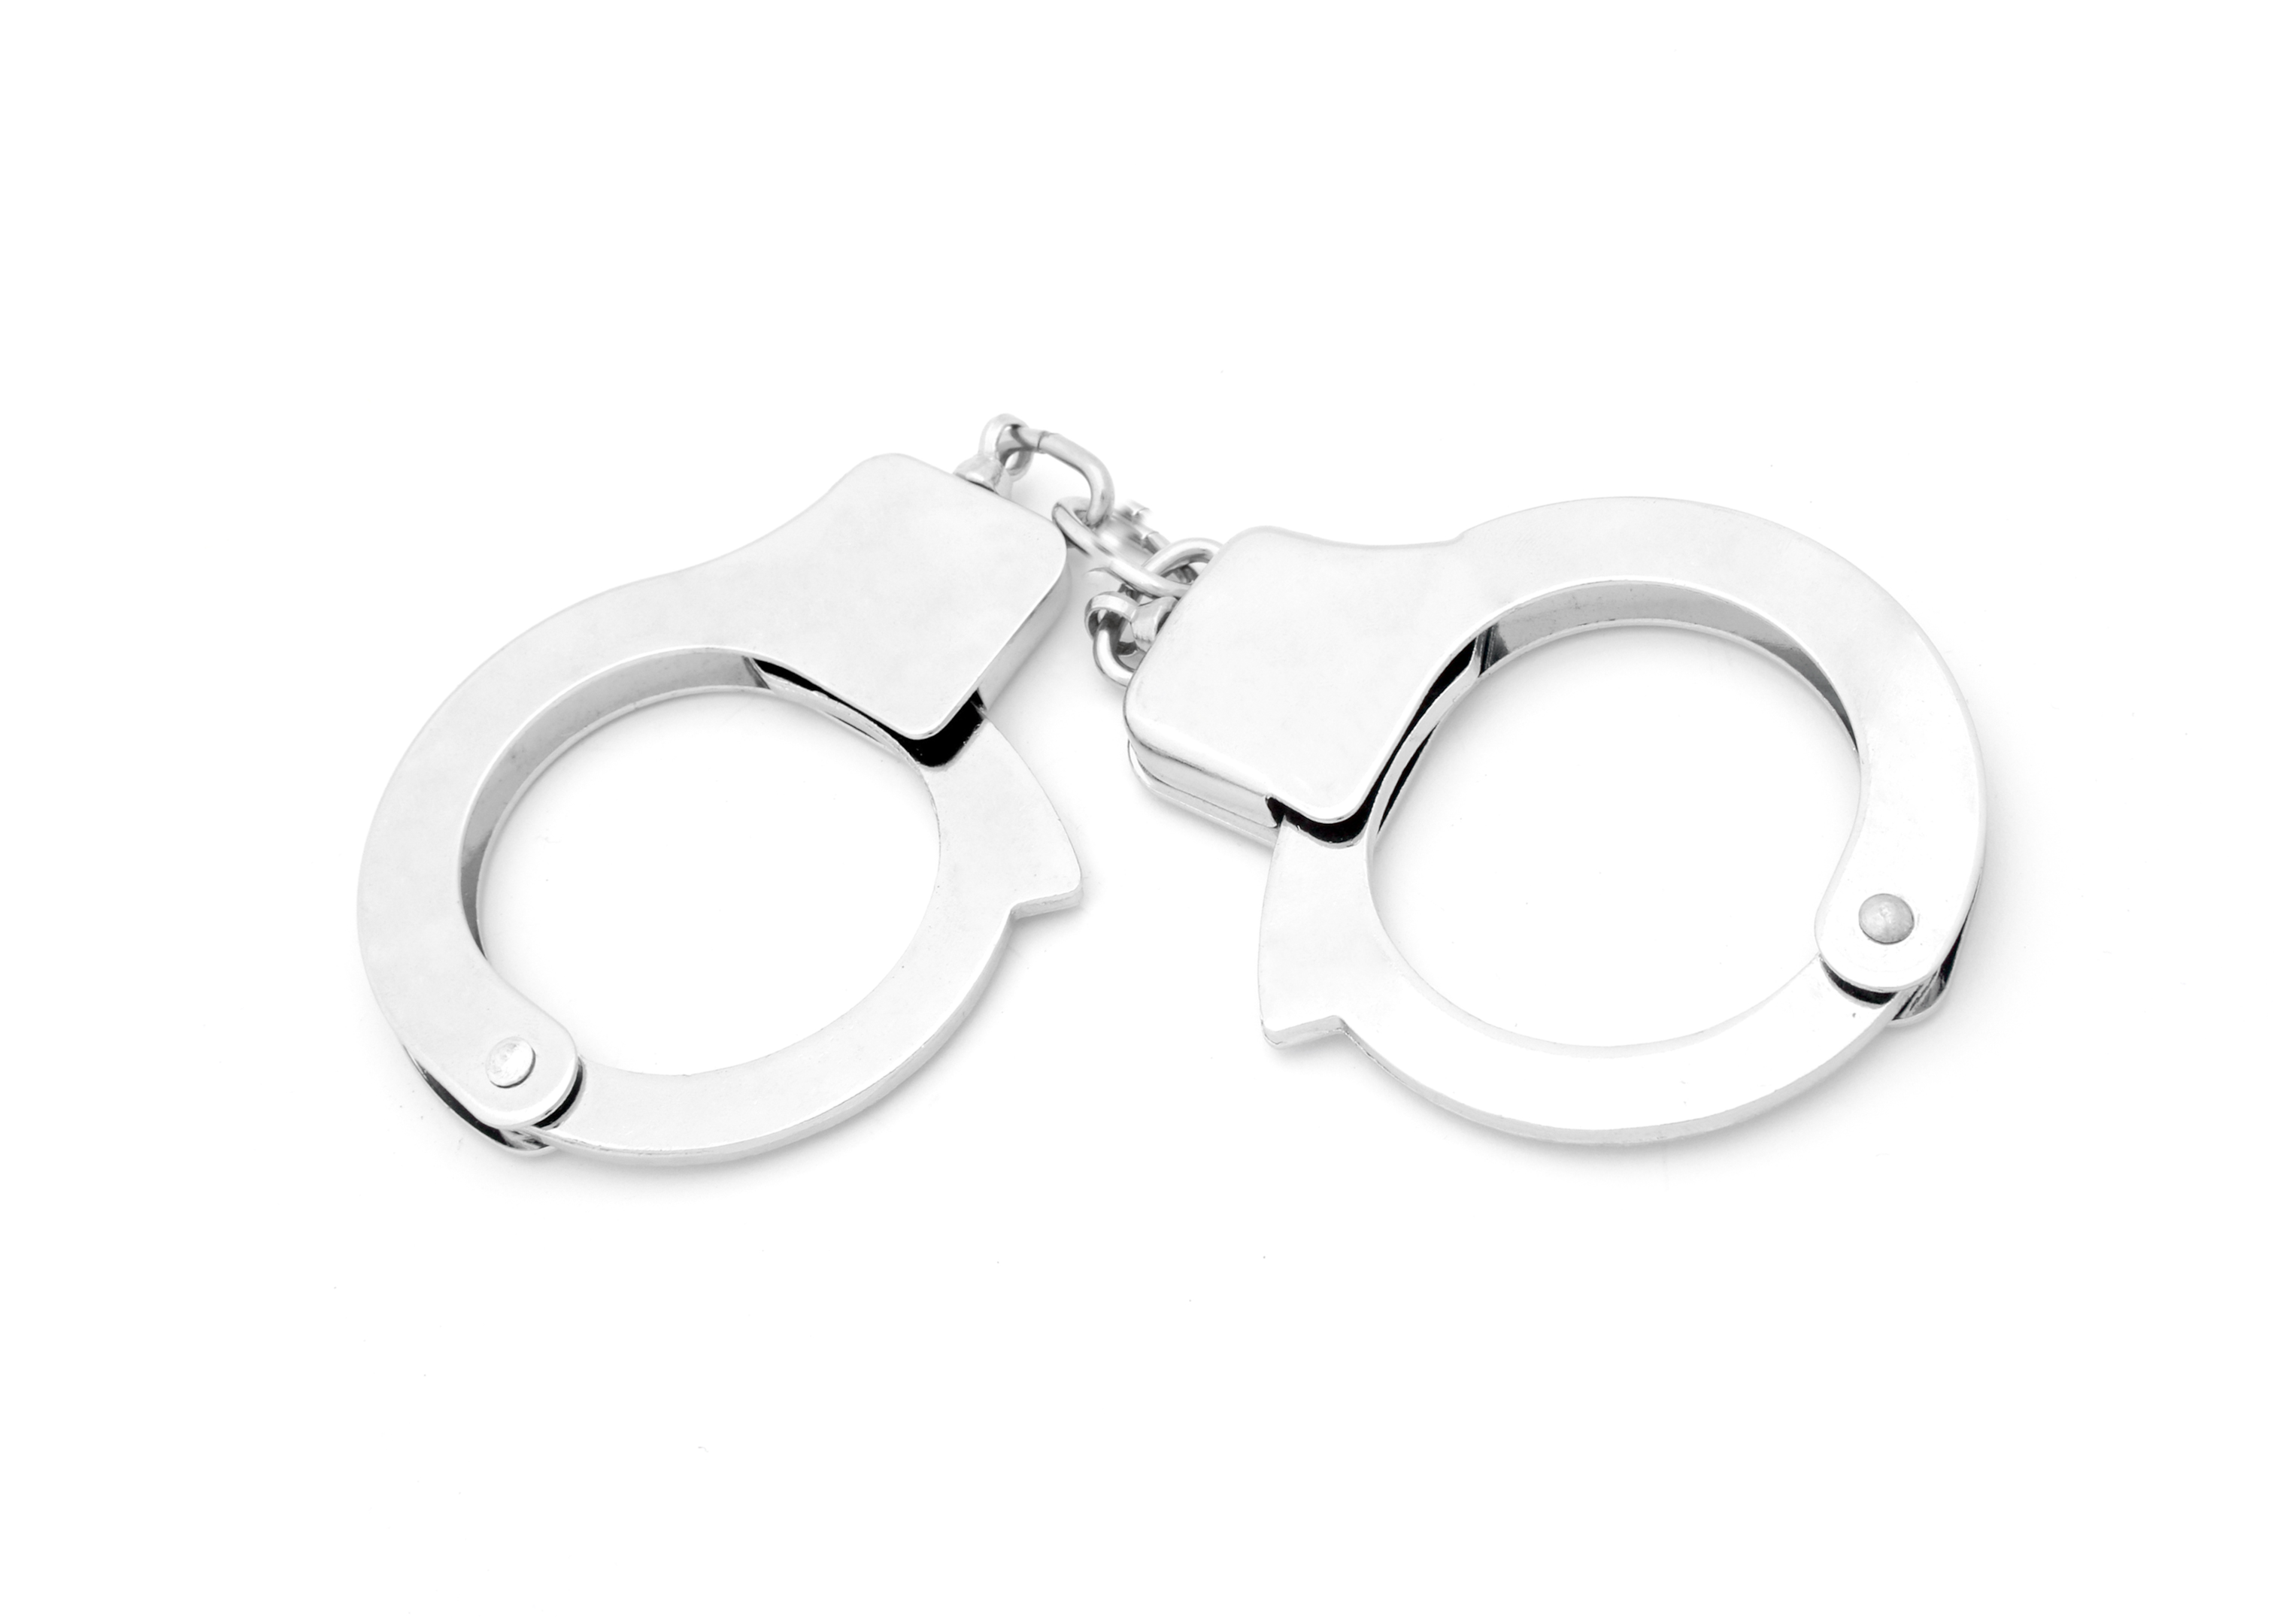 Handcuffs in high resolution - a vivid reminder that stealing is not an option.